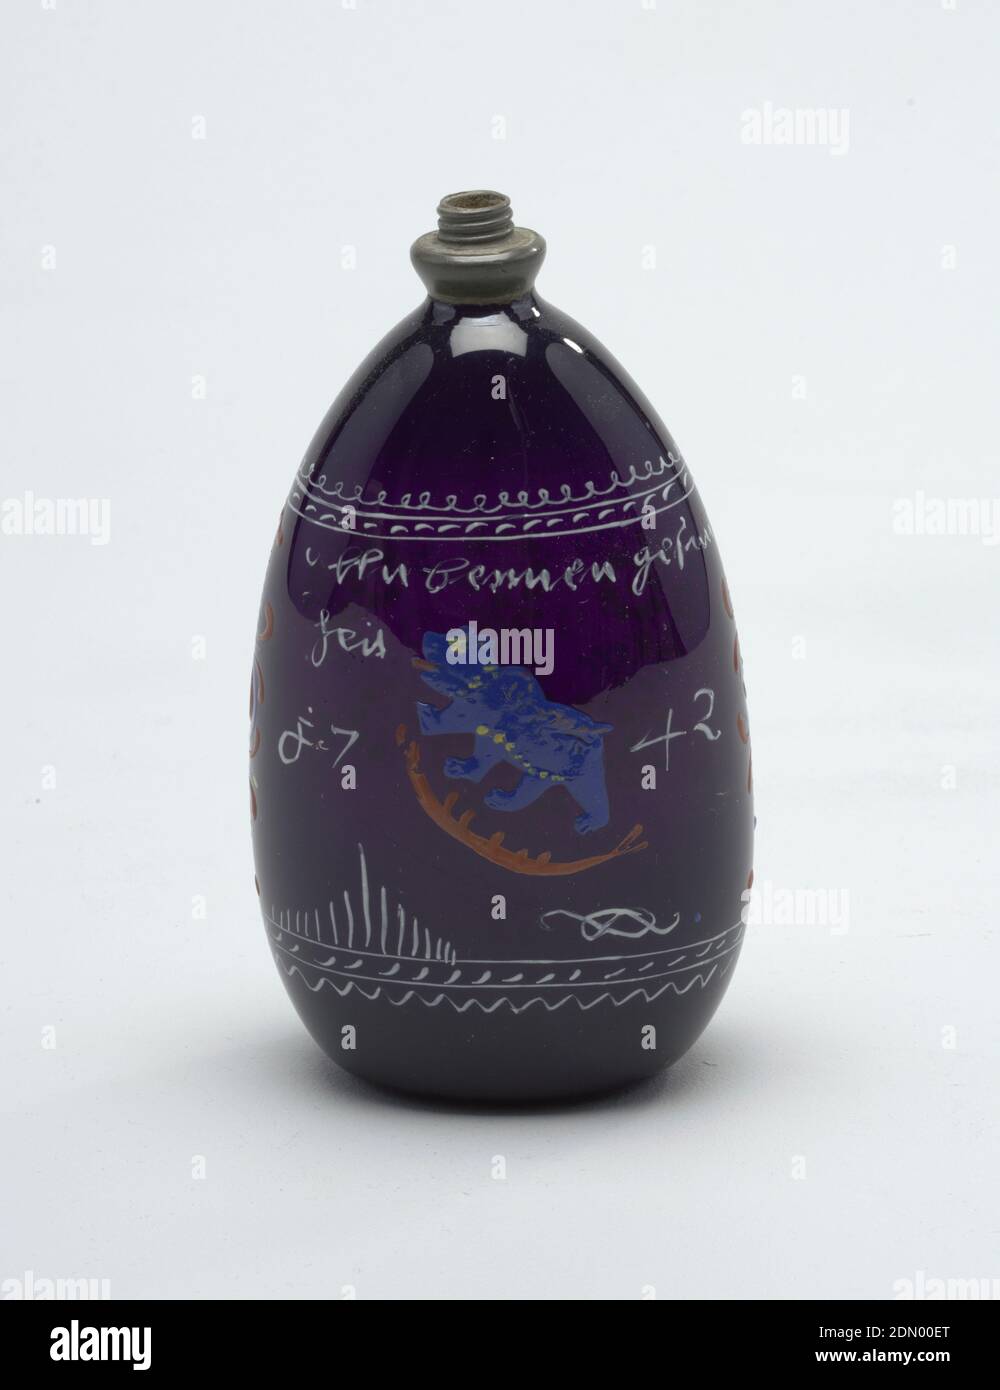 Bottle, Painted glass, Tear-drop shaped glass in deep purple with painted decoration., Switzerland, 18th century, glasswares, Decorative Arts, Bottle Stock Photo